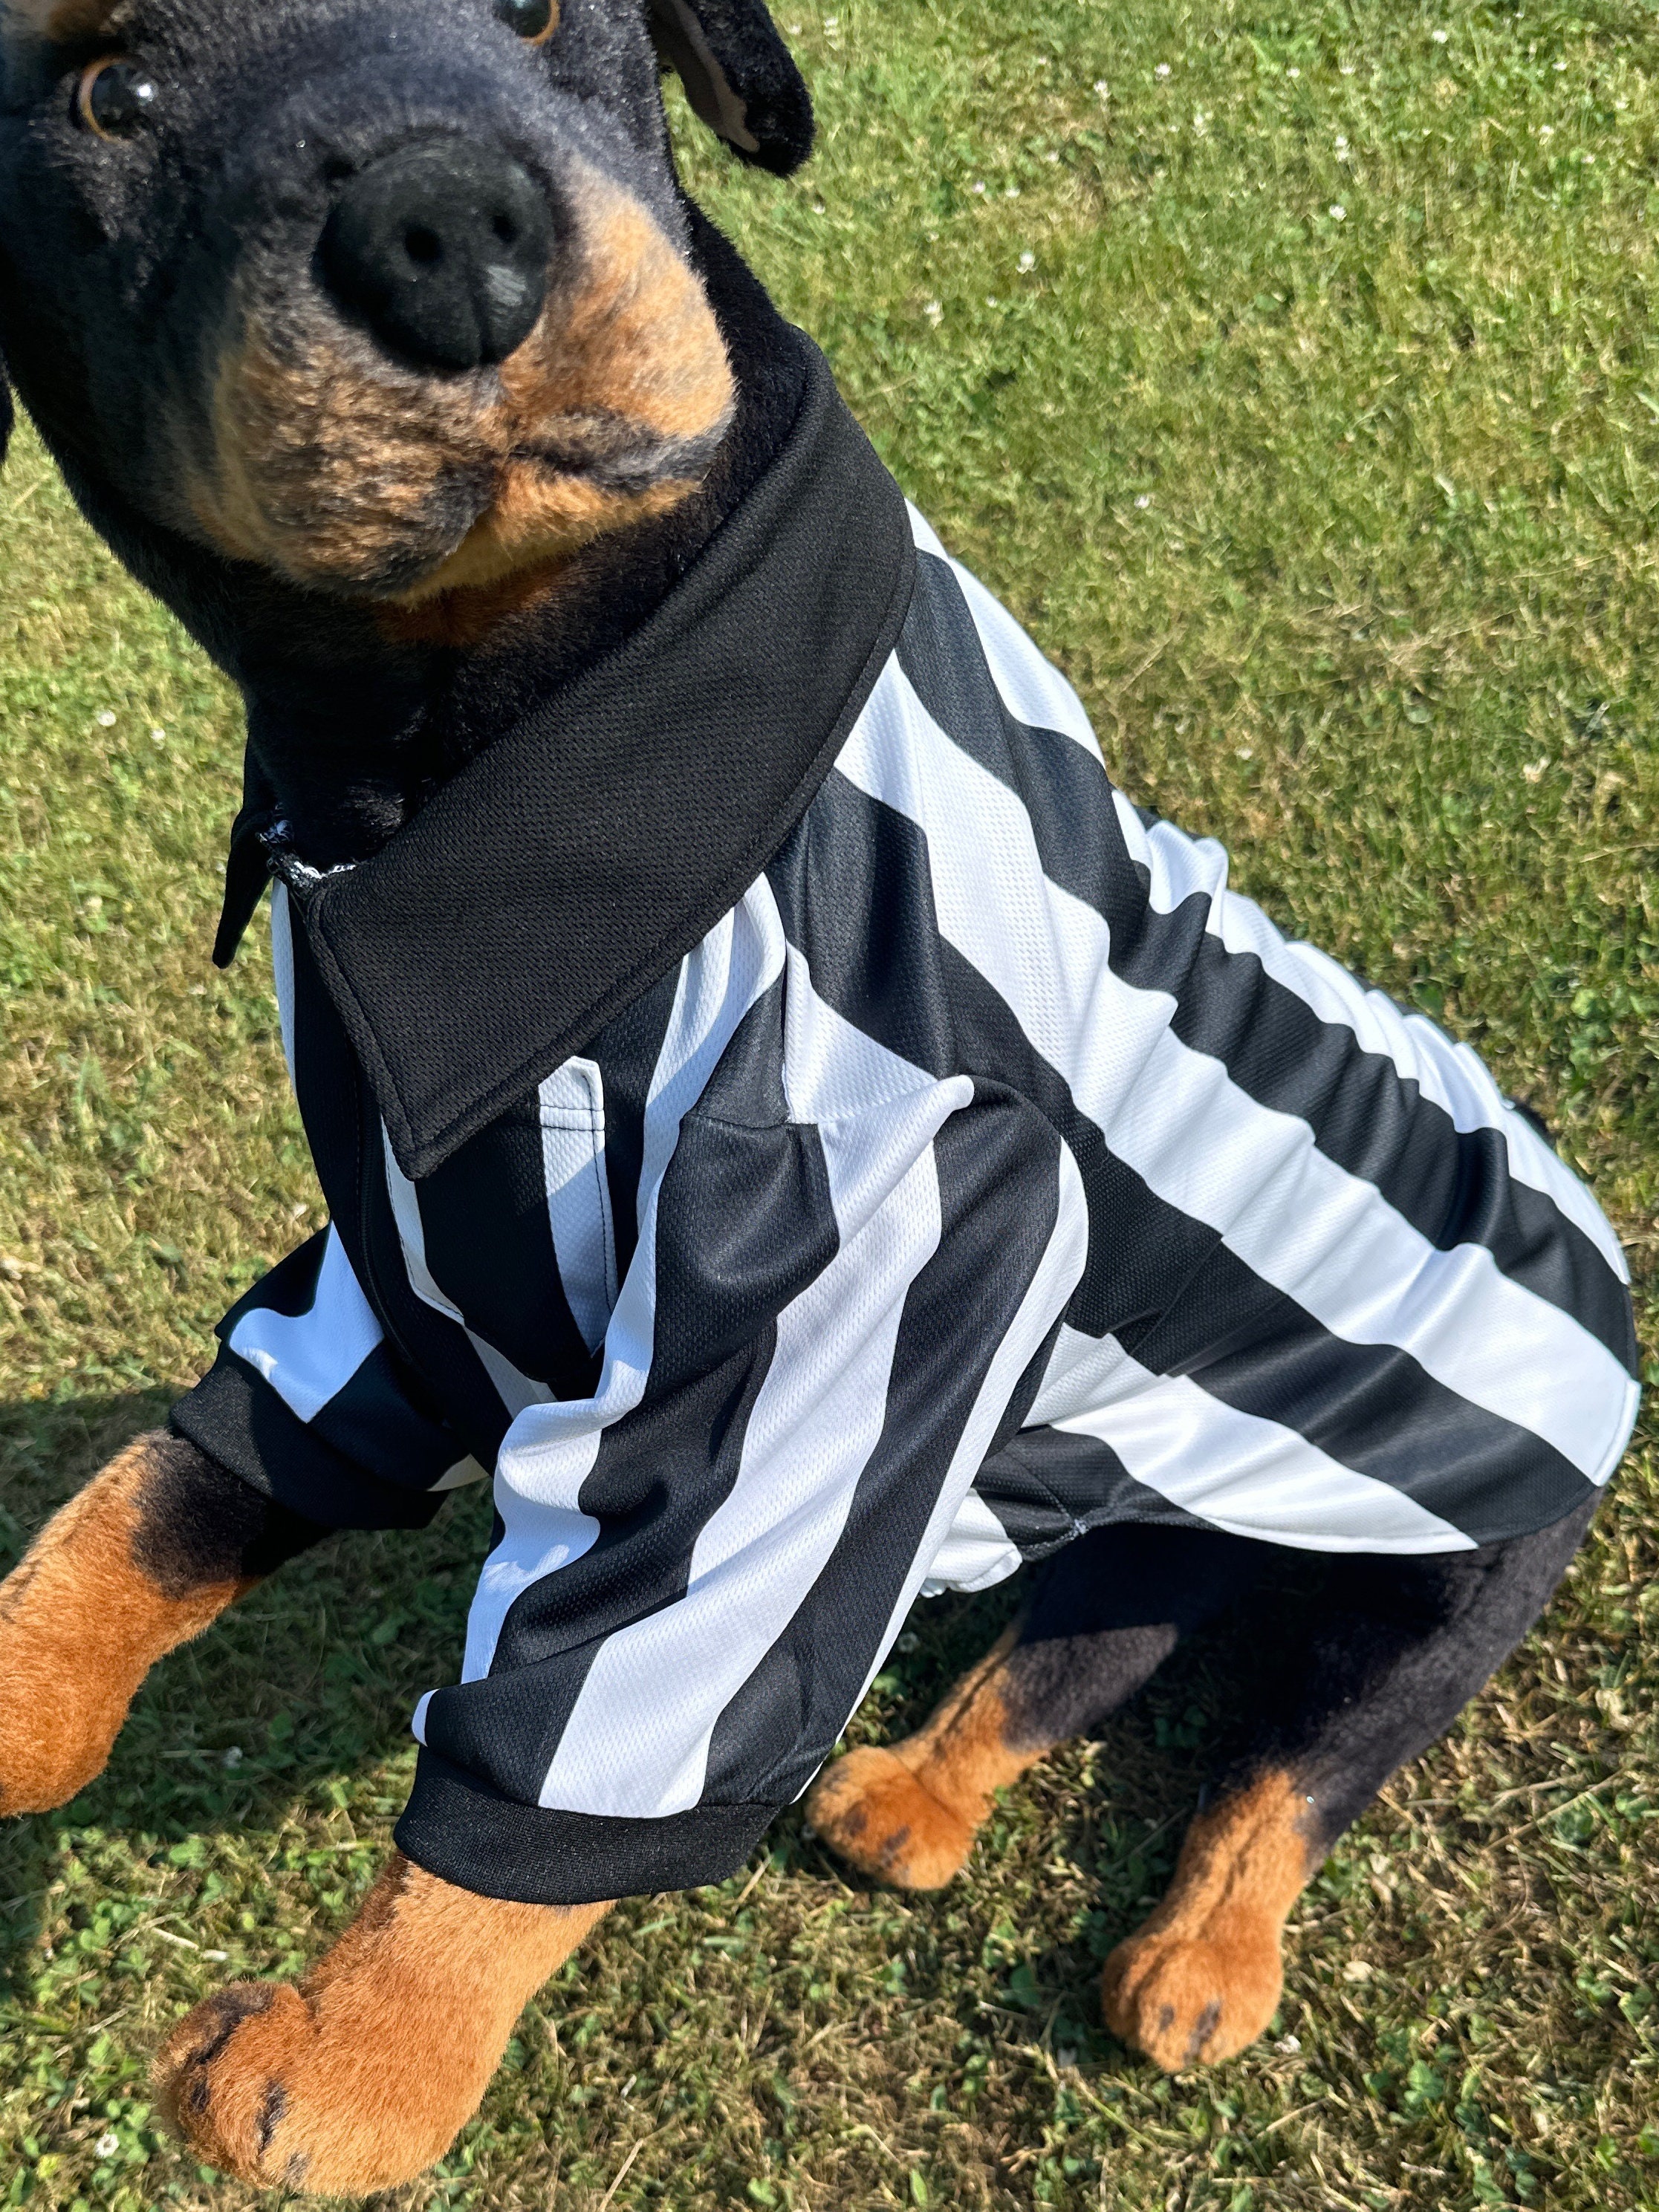 Referee Dog Shirt/costume for large breed dogs great for sporting events ,  parties, Halloween!